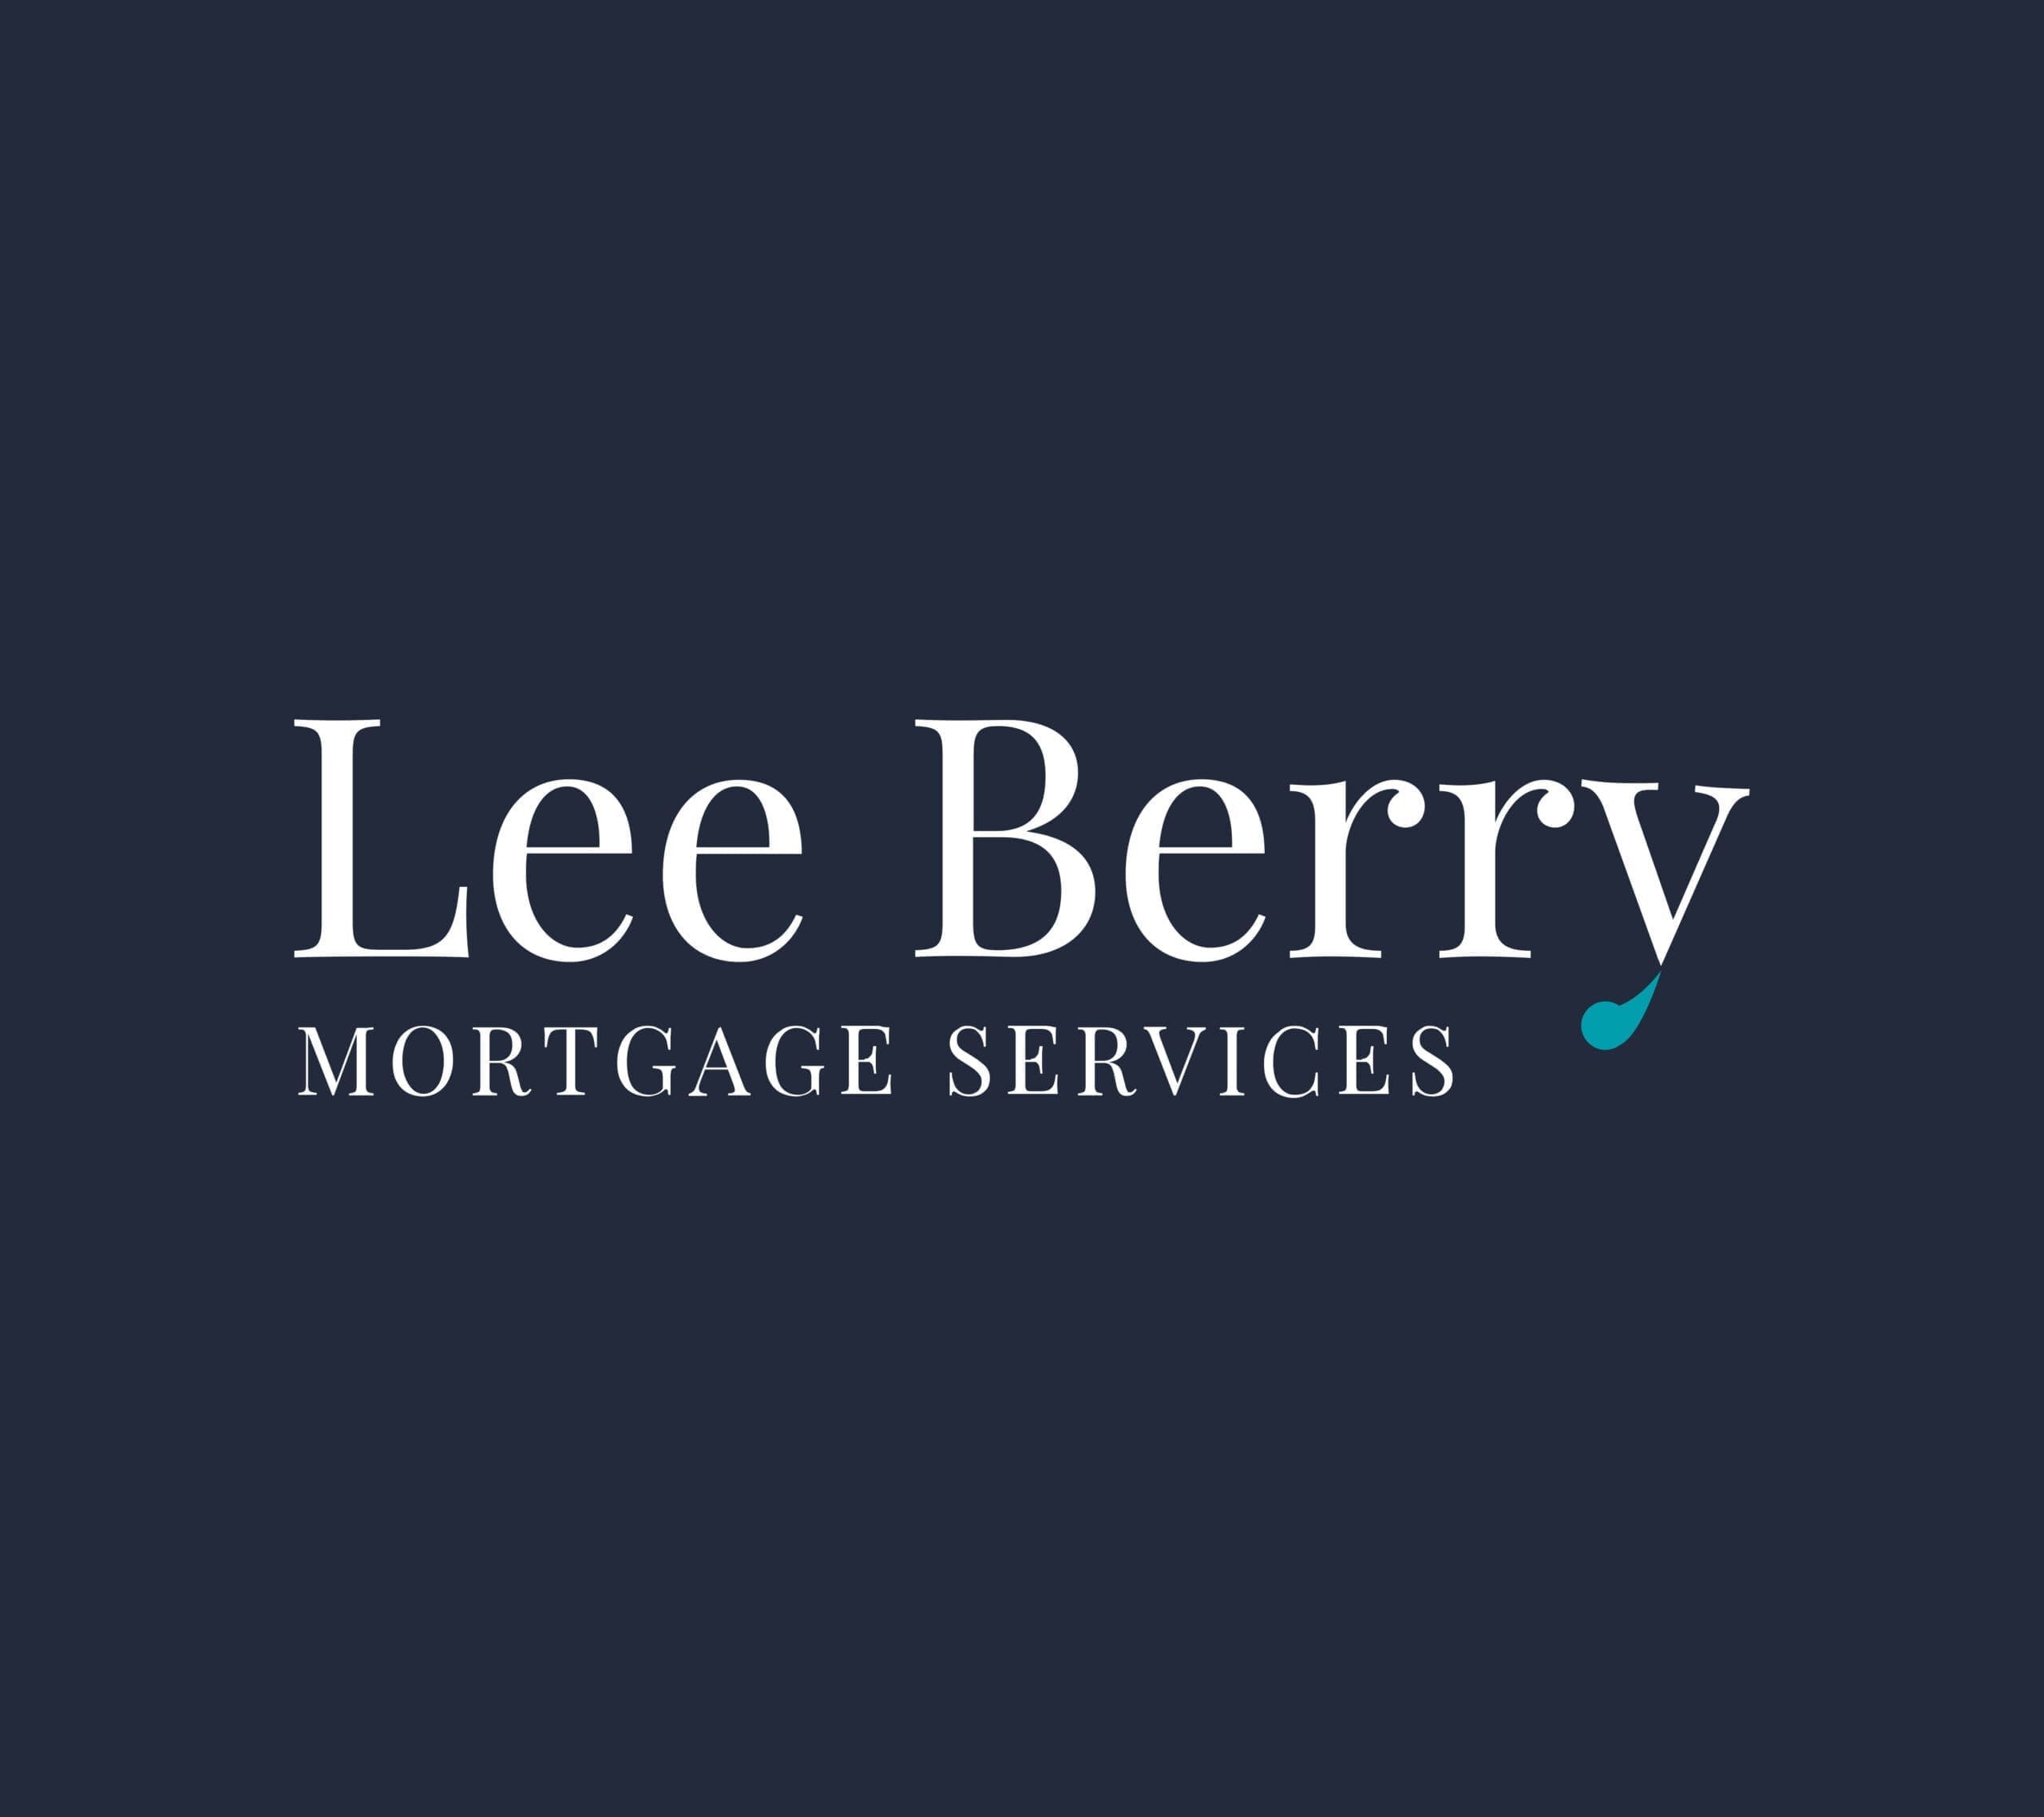 The logo for Lee Berry Mortgage Services, designed by a freelance web designer from Essex.